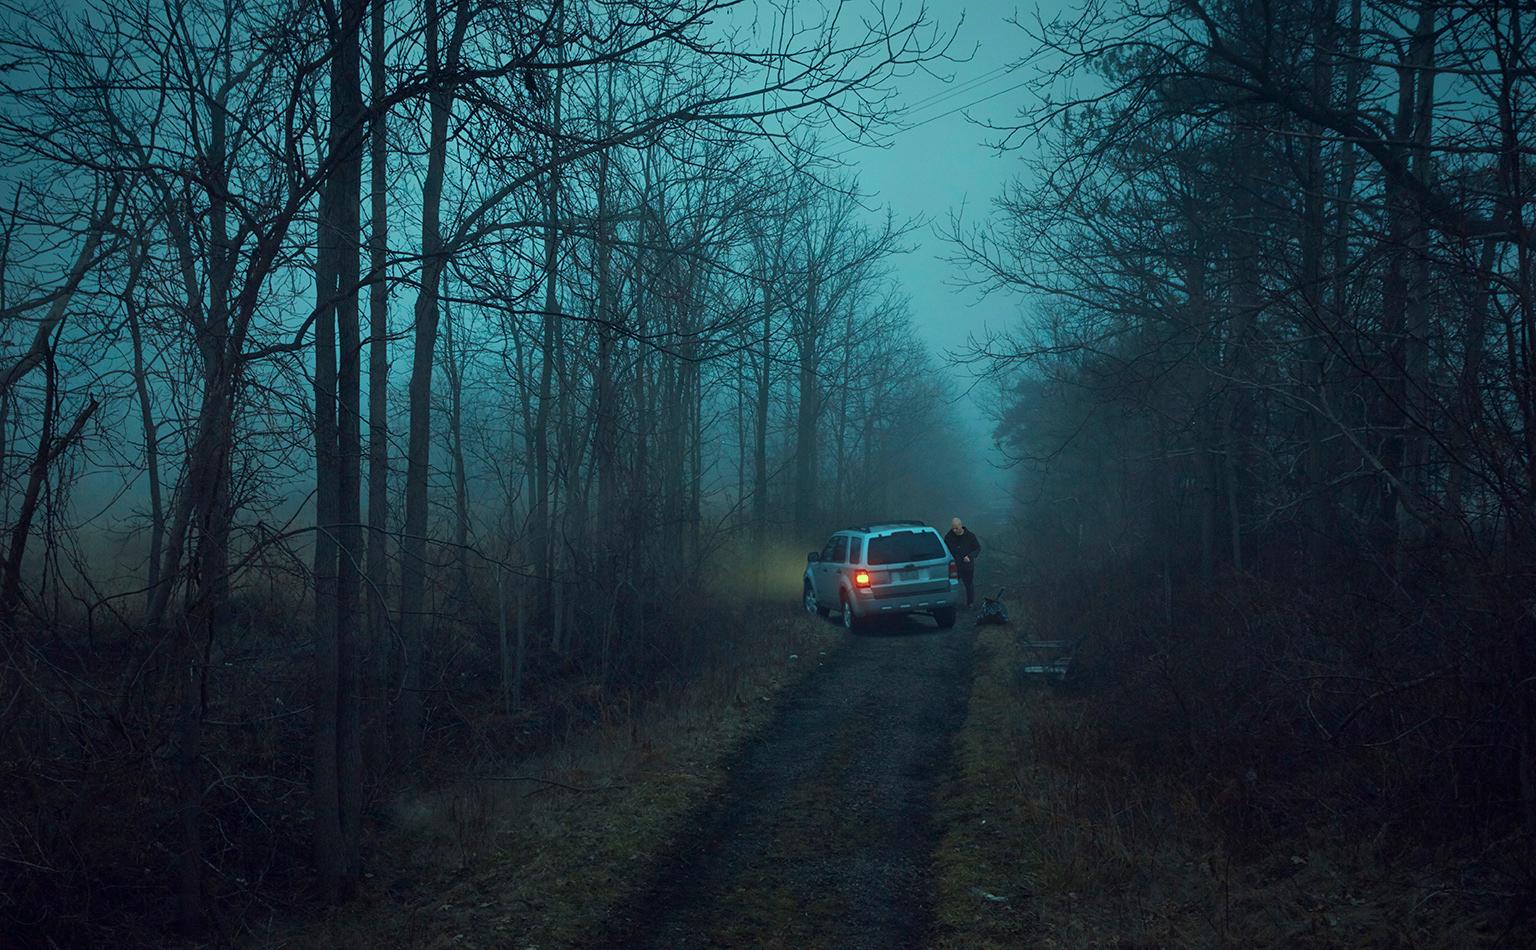 “Escape”, Ontario, Canada, 2018.
Archival Pigment Print, 44”X27”. Edition of 7.
Signed, Dated and Numbered on the Reverse.

Tyler Gray’s photographs are cinematic in their storytelling. They are those moments that transform and become completely